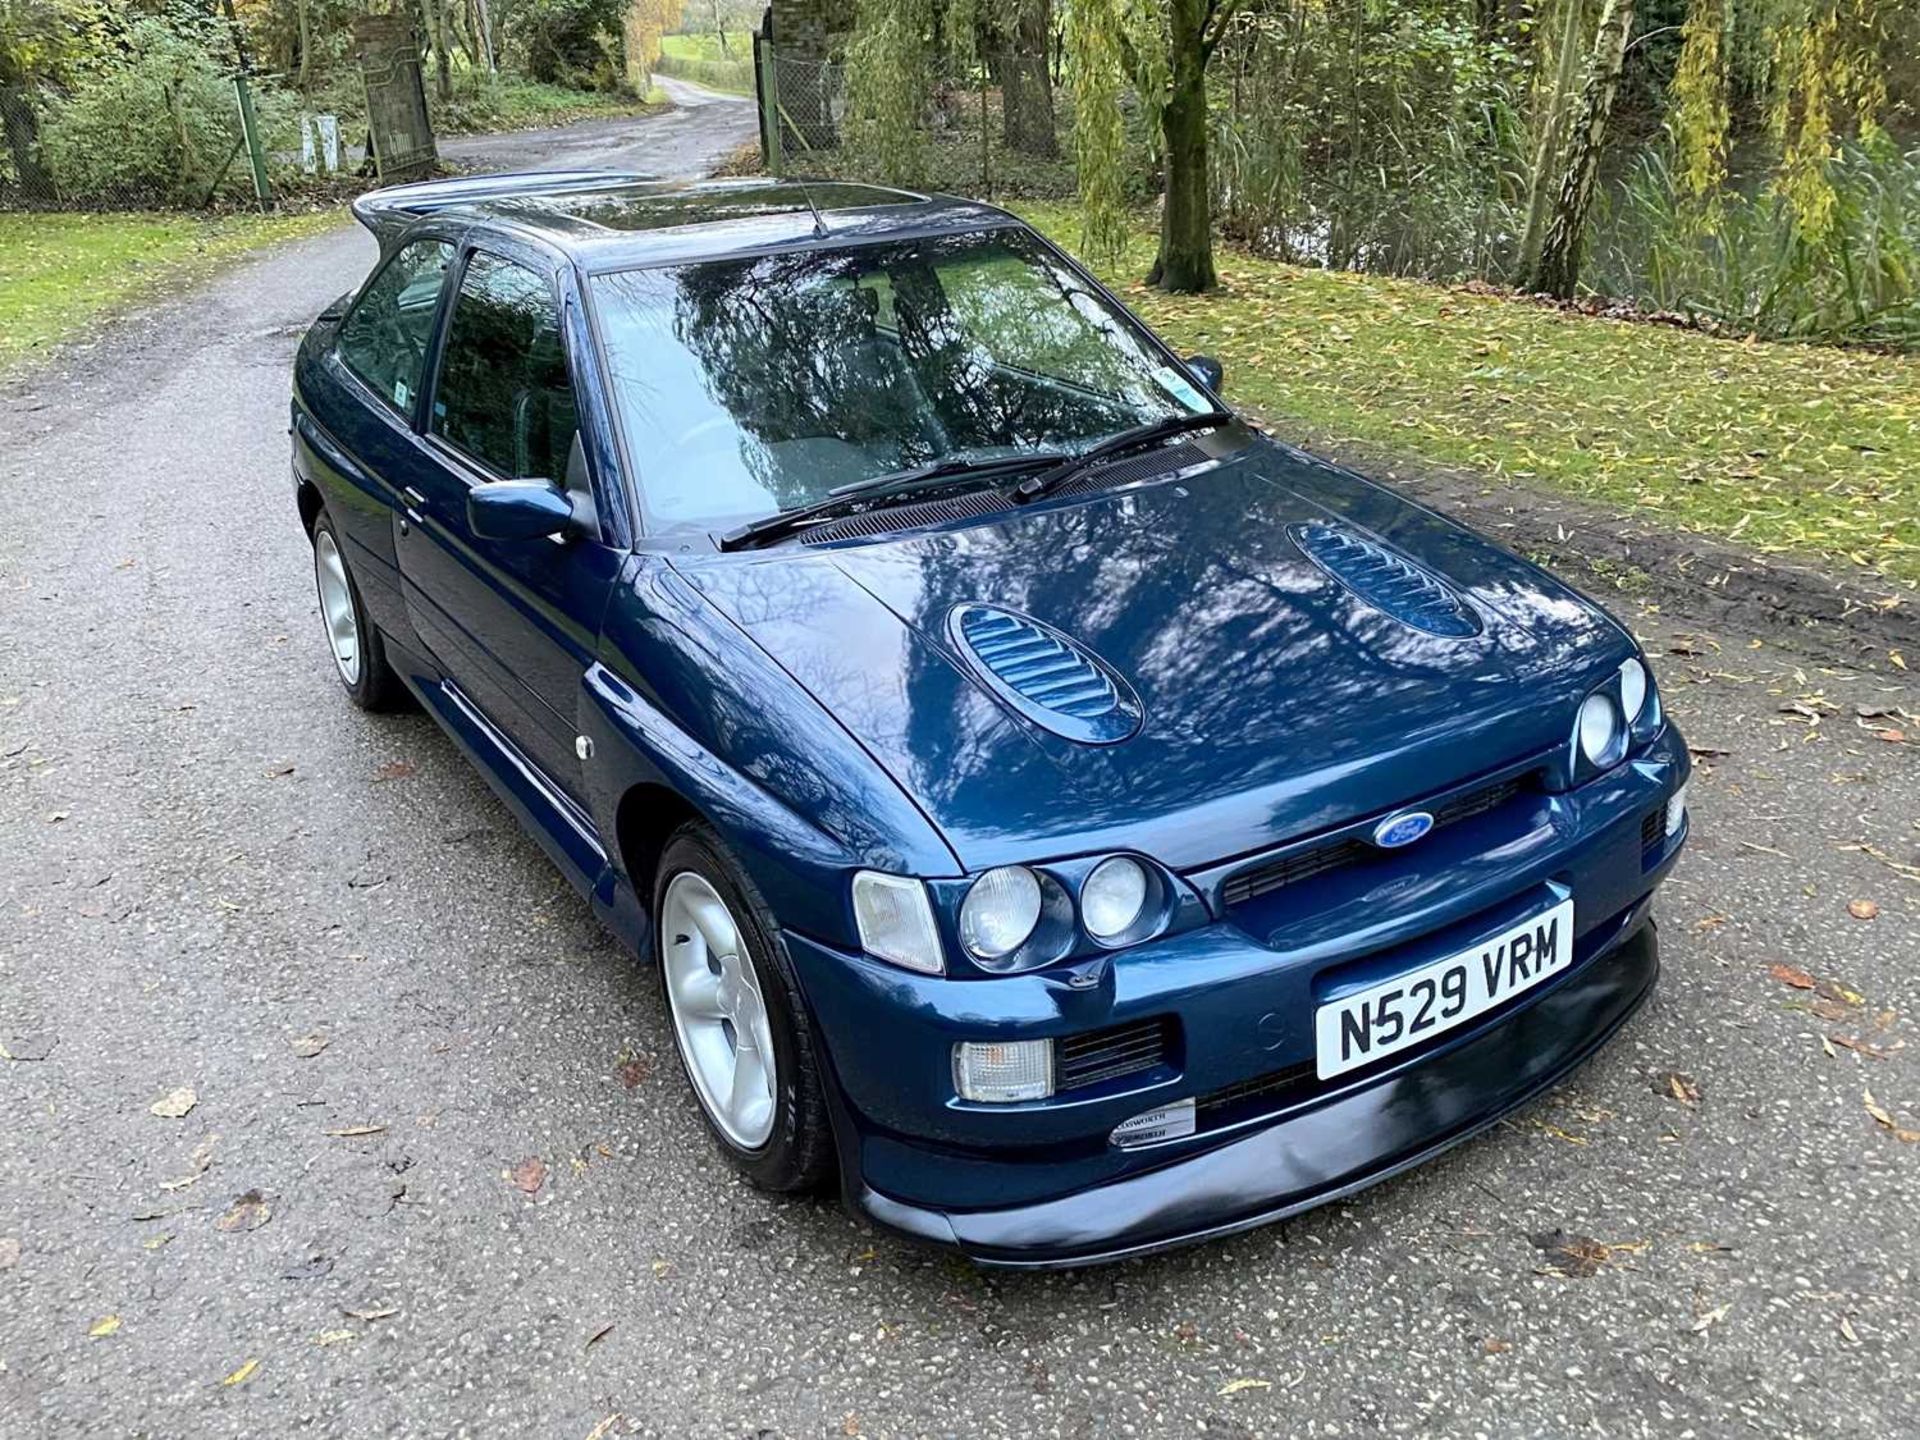 1995 Ford Escort RS Cosworth LUX Only 56,000 miles, finished in rare Petrol Blue - Image 3 of 98